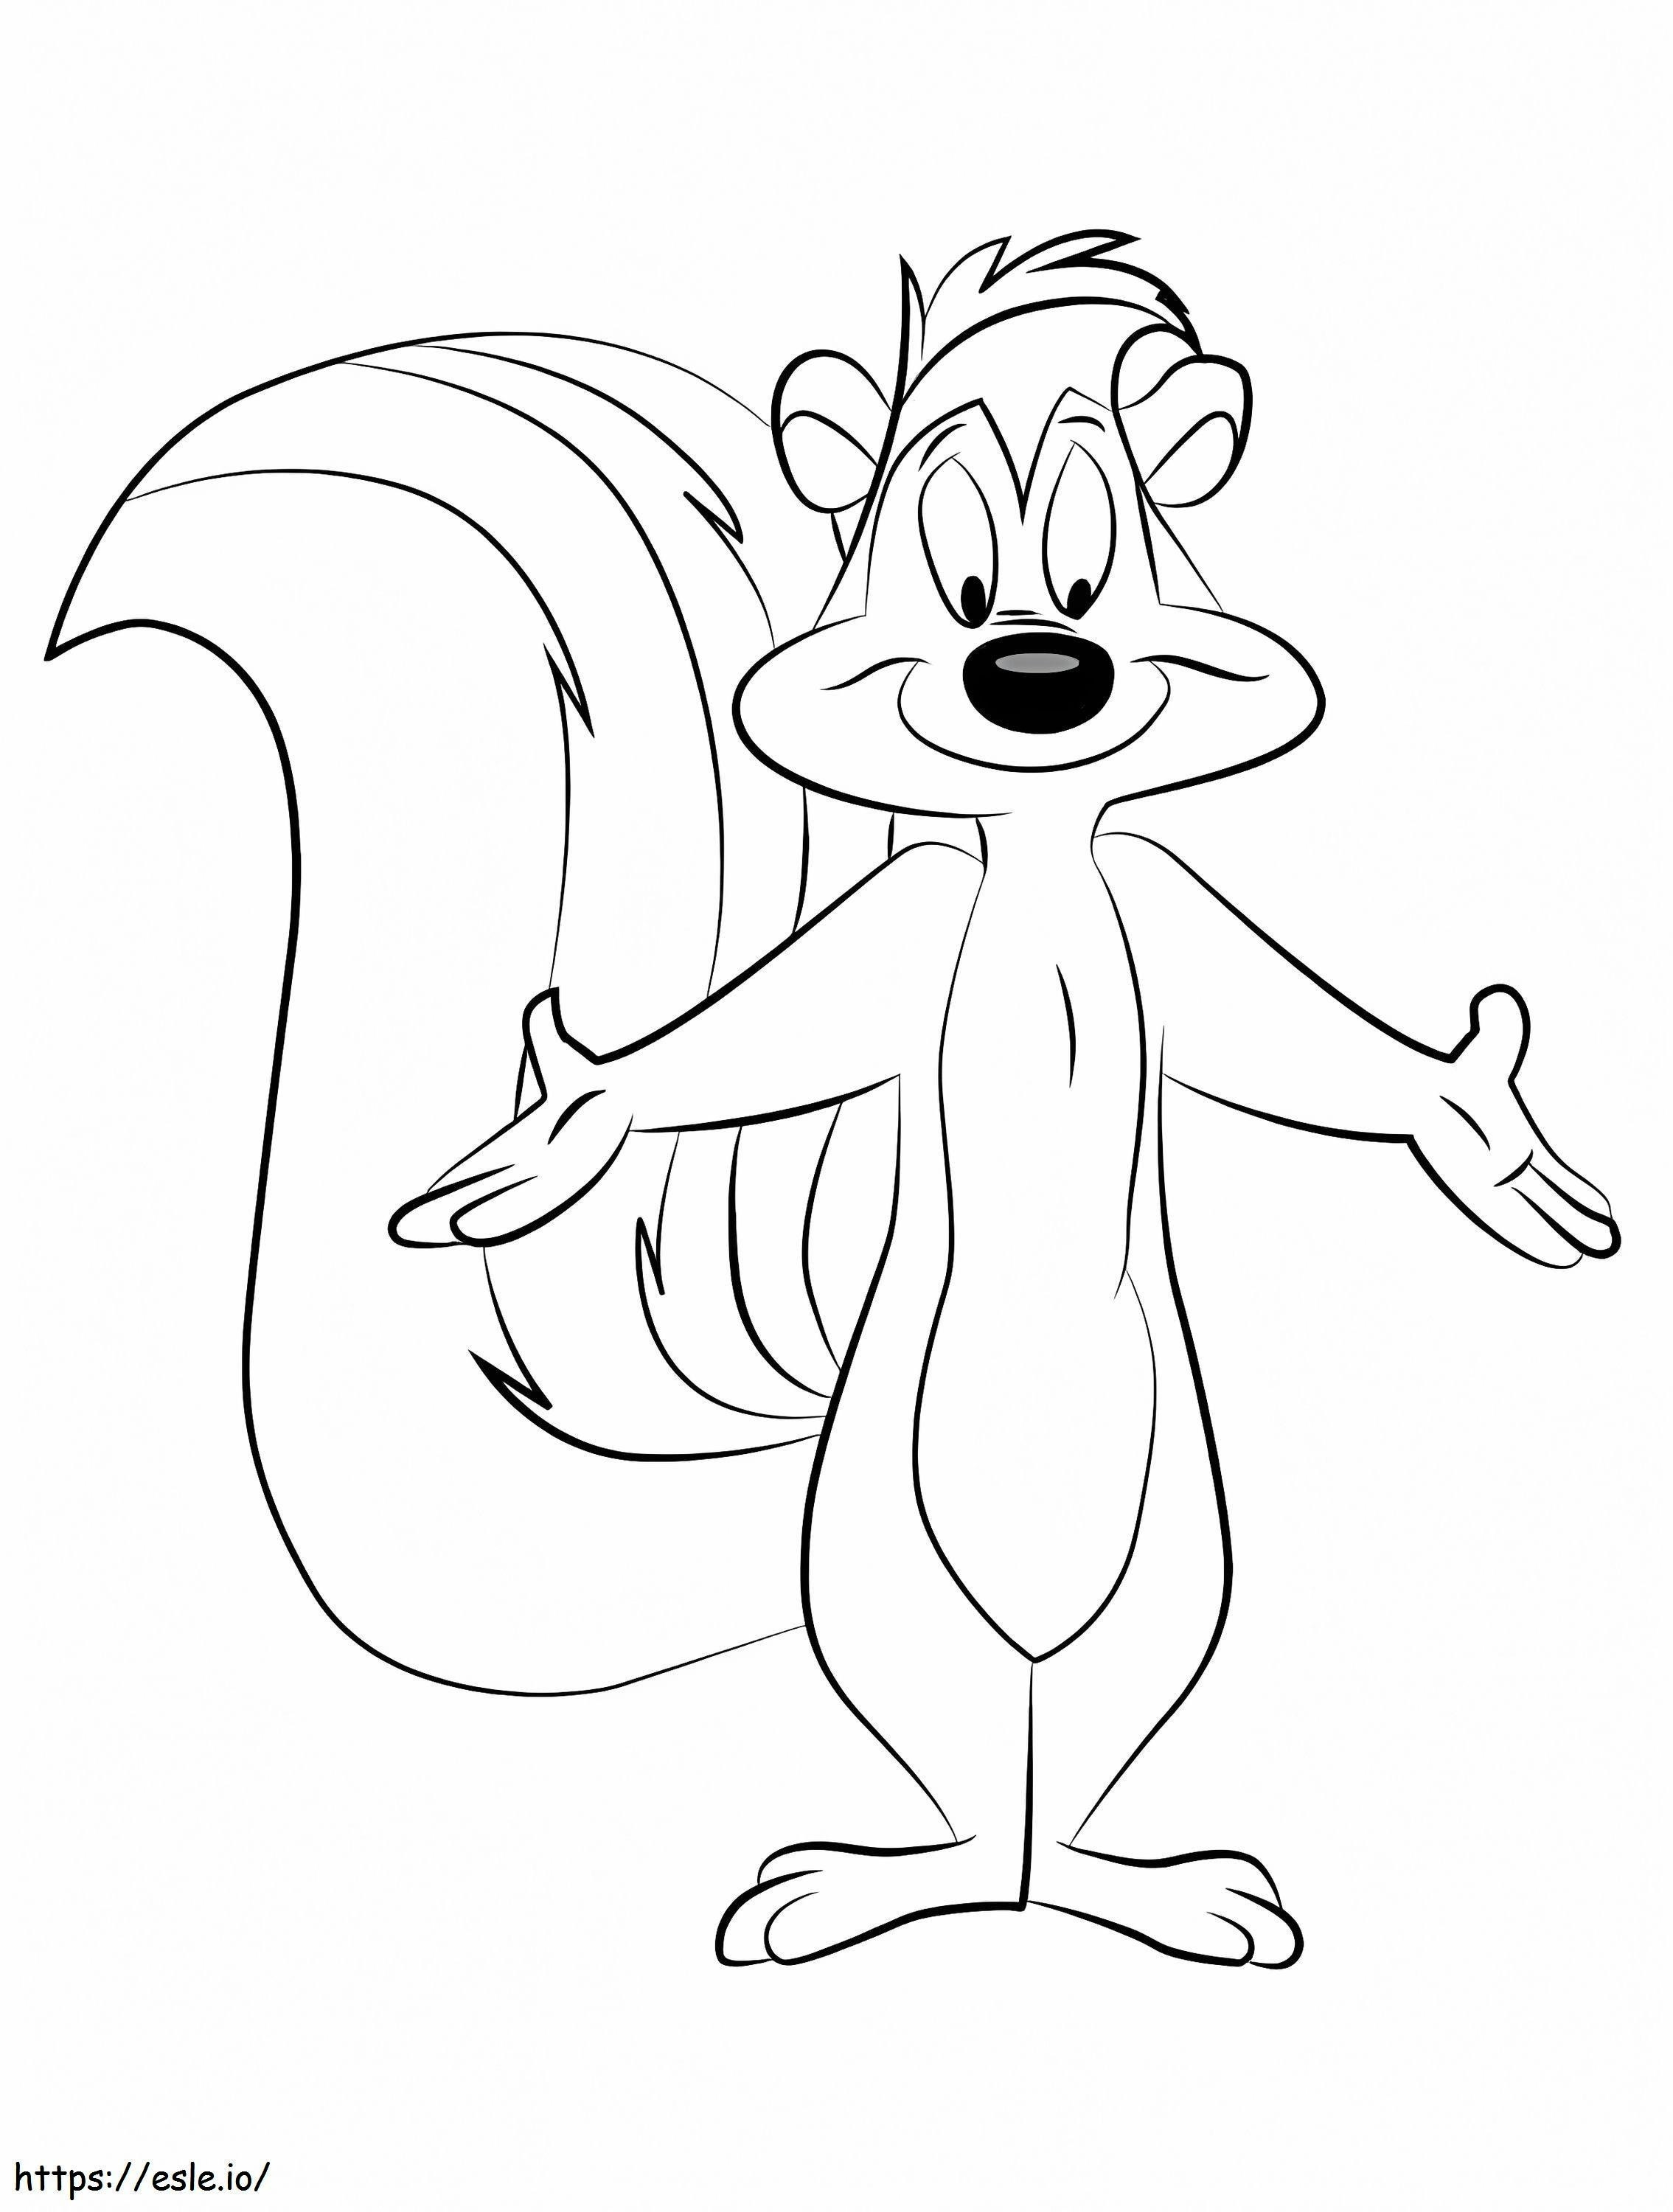 Pepe Le Pew From Looney Tunes coloring page